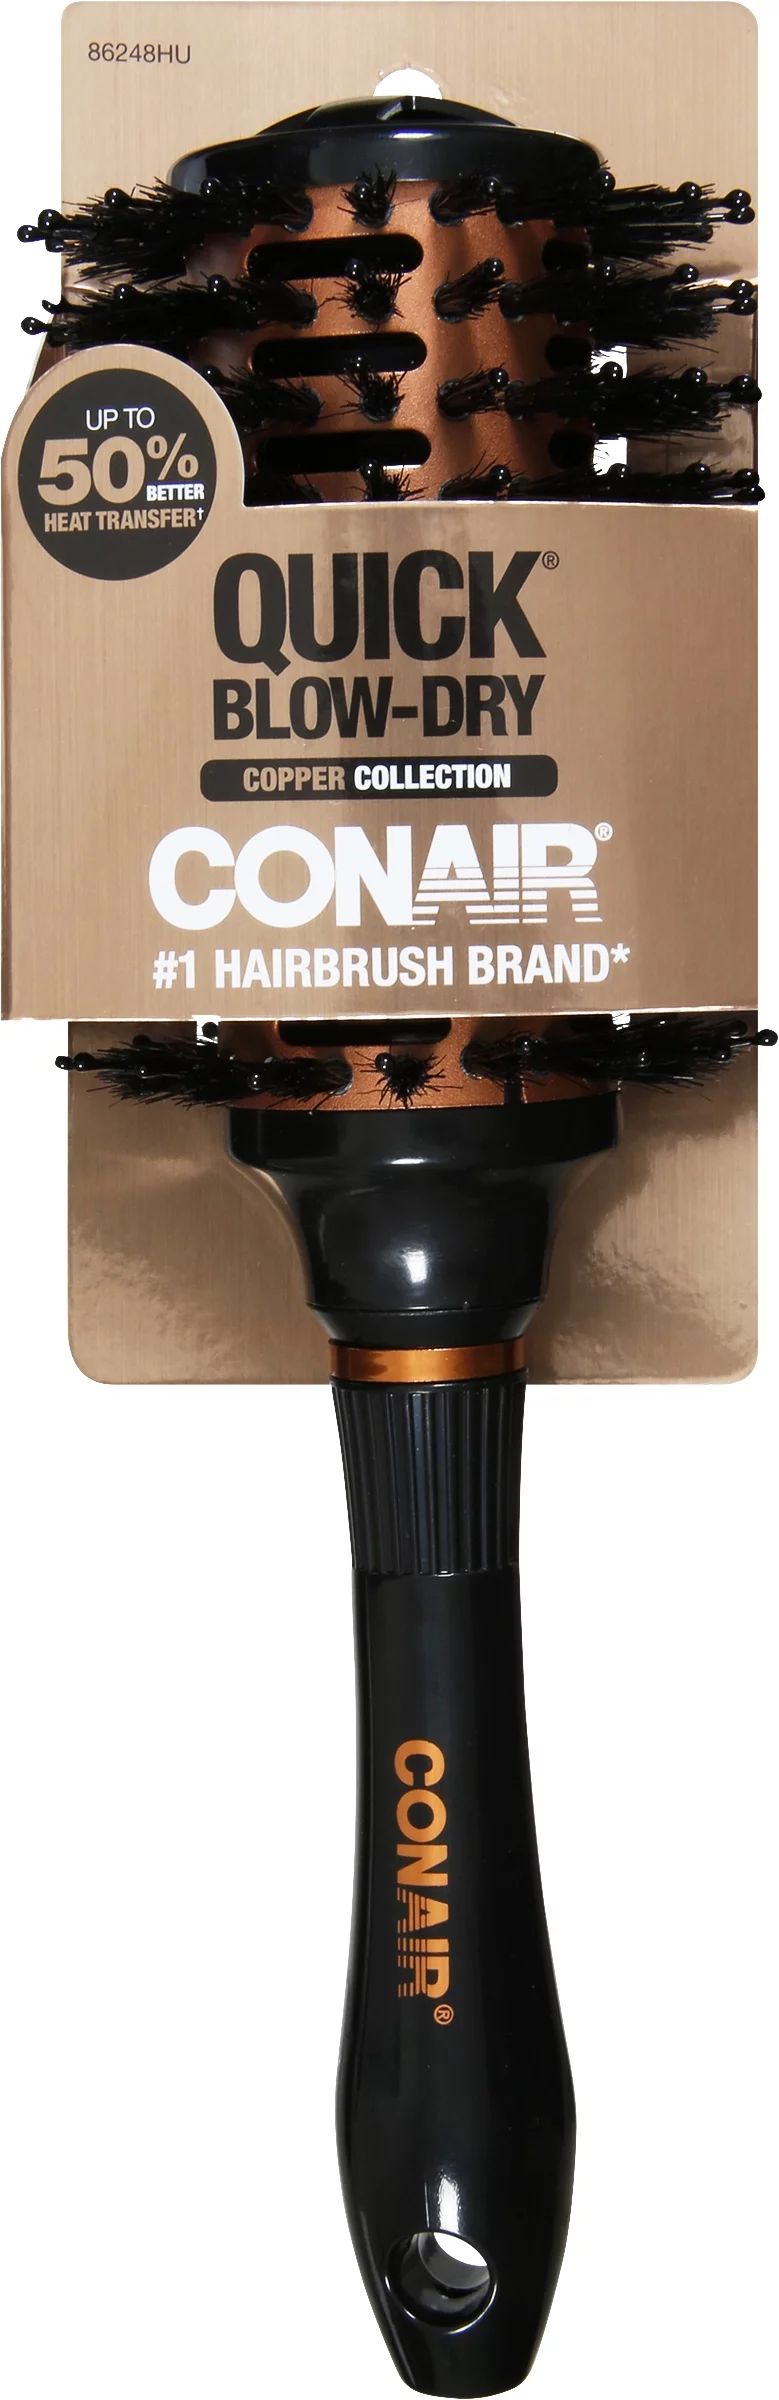 Conair Quick Blow Dry Pro Porcupine Round Hair Brush - Copper Collection | Walmart (US)